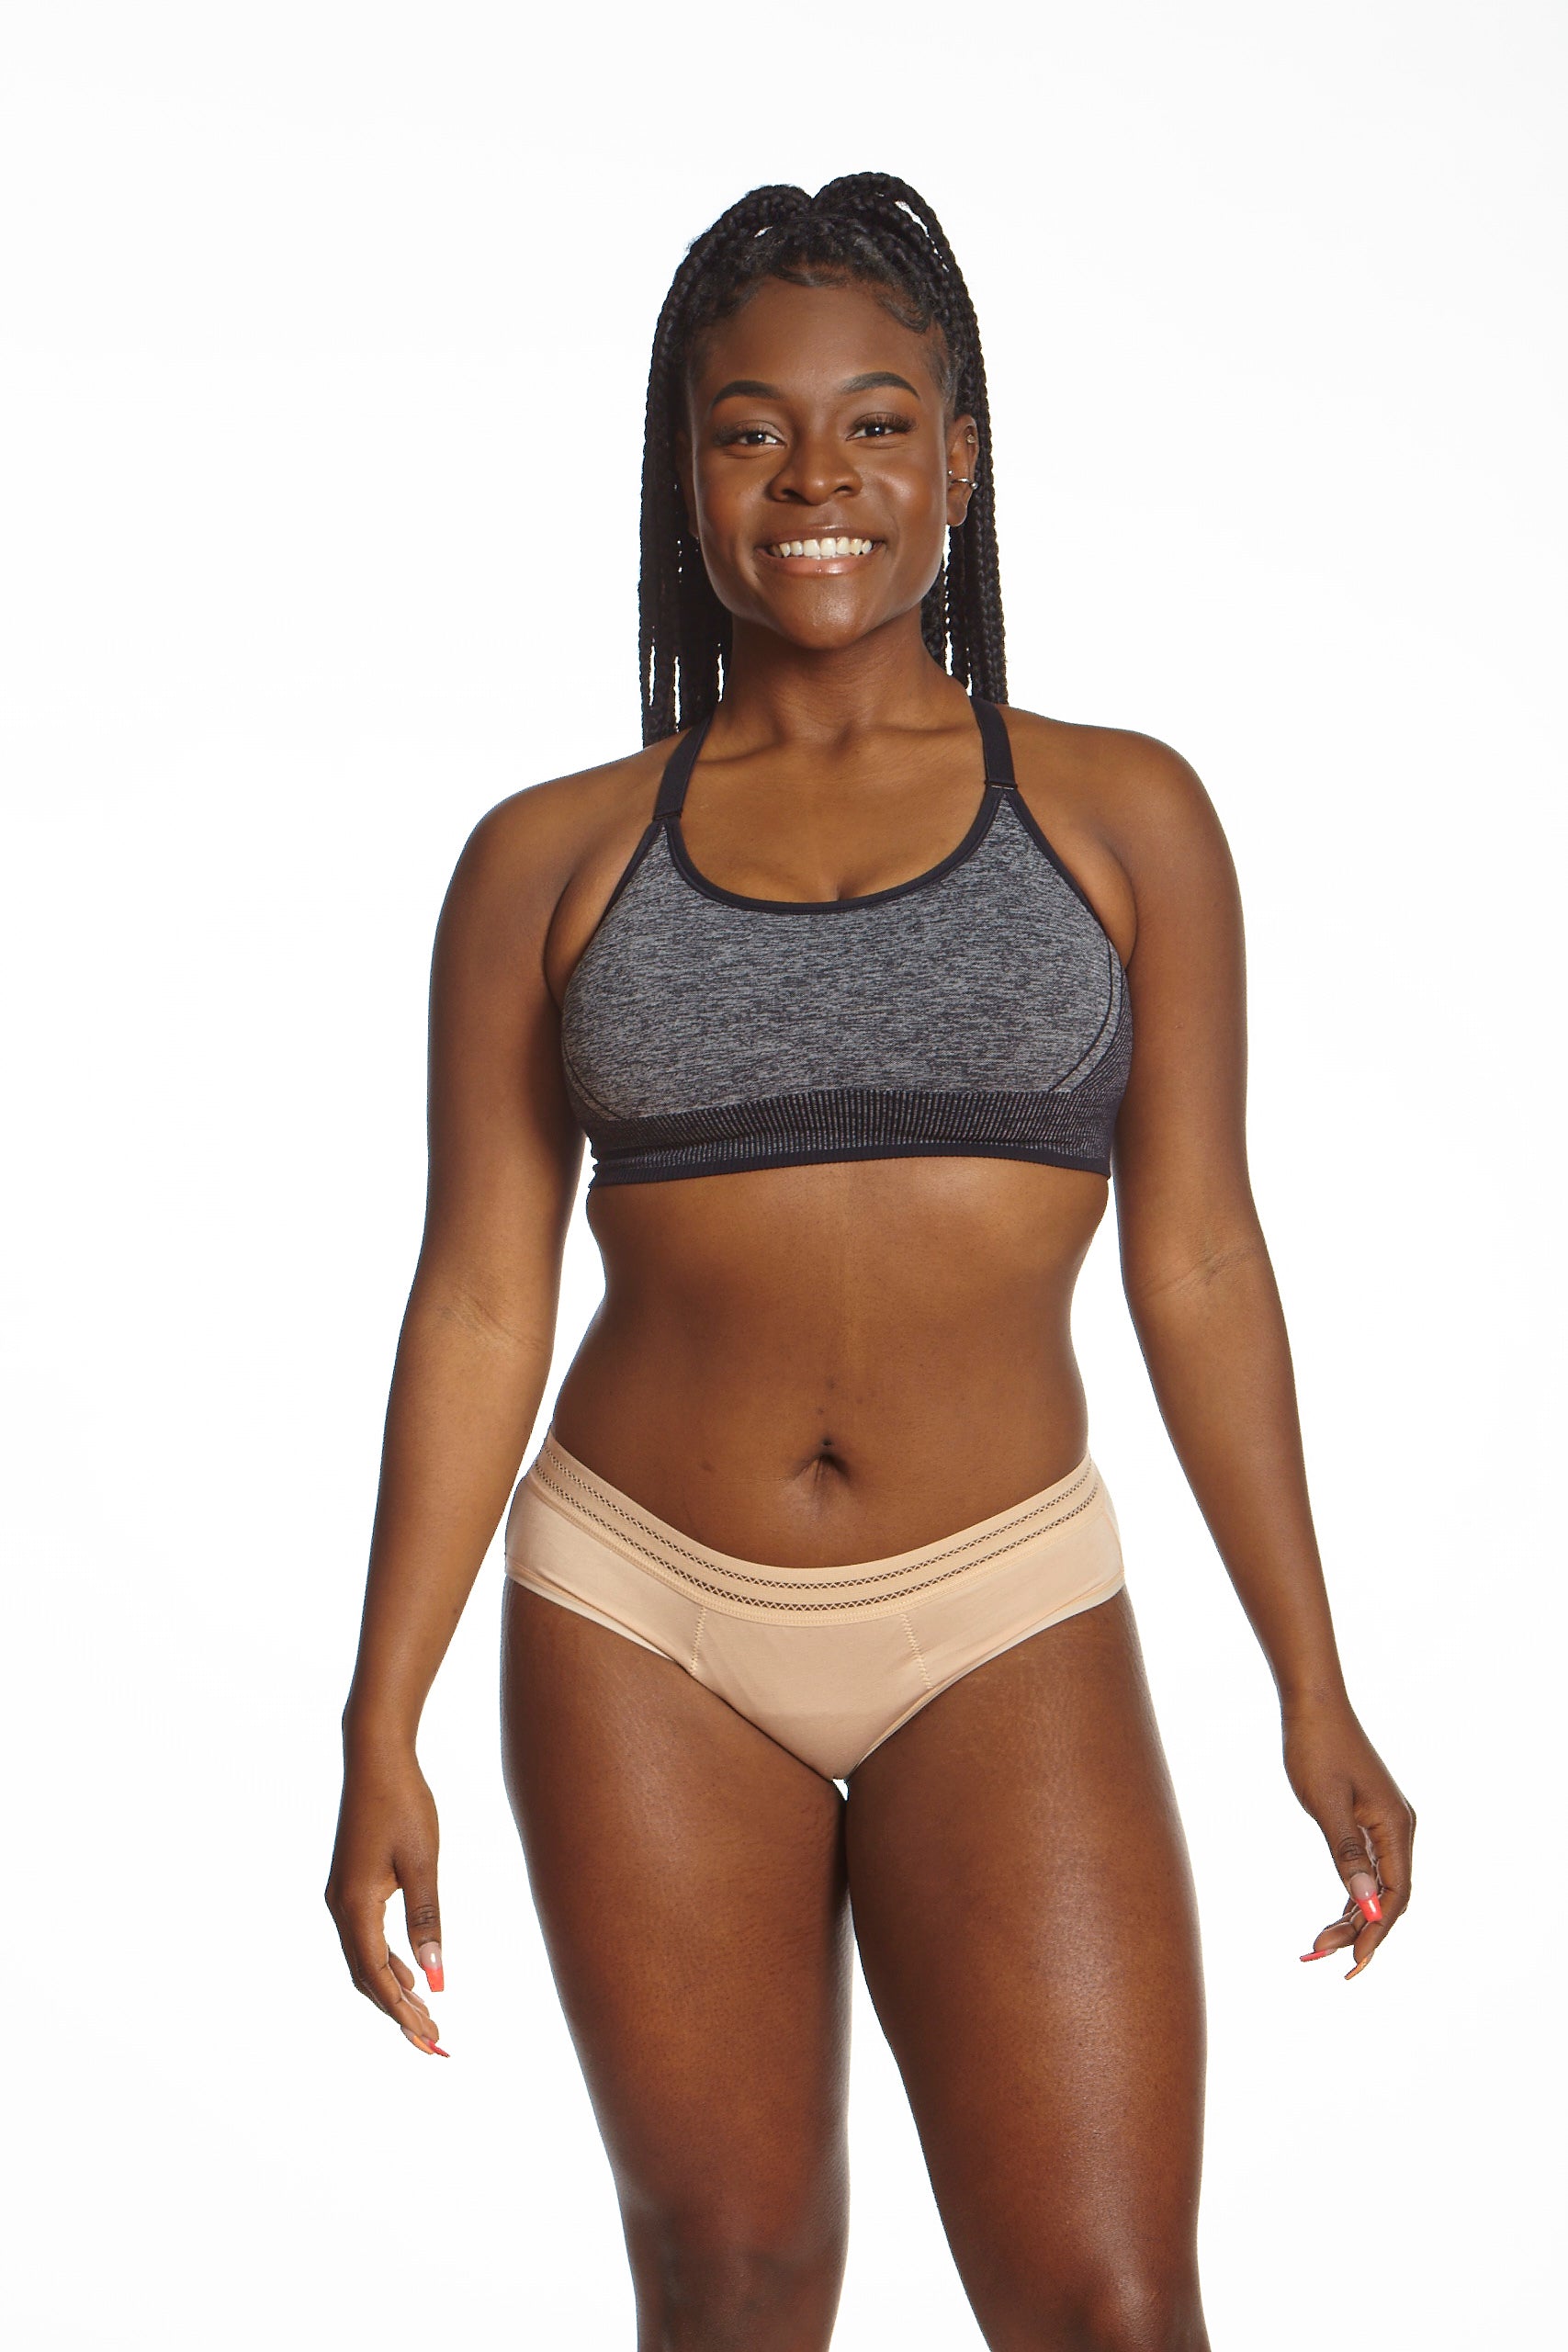 Buy Washable Incontinence Panties  Best Incontinence Underwear for Women -  Necessit-Ease, Inc. – Simple Necessit-Ease, Inc.